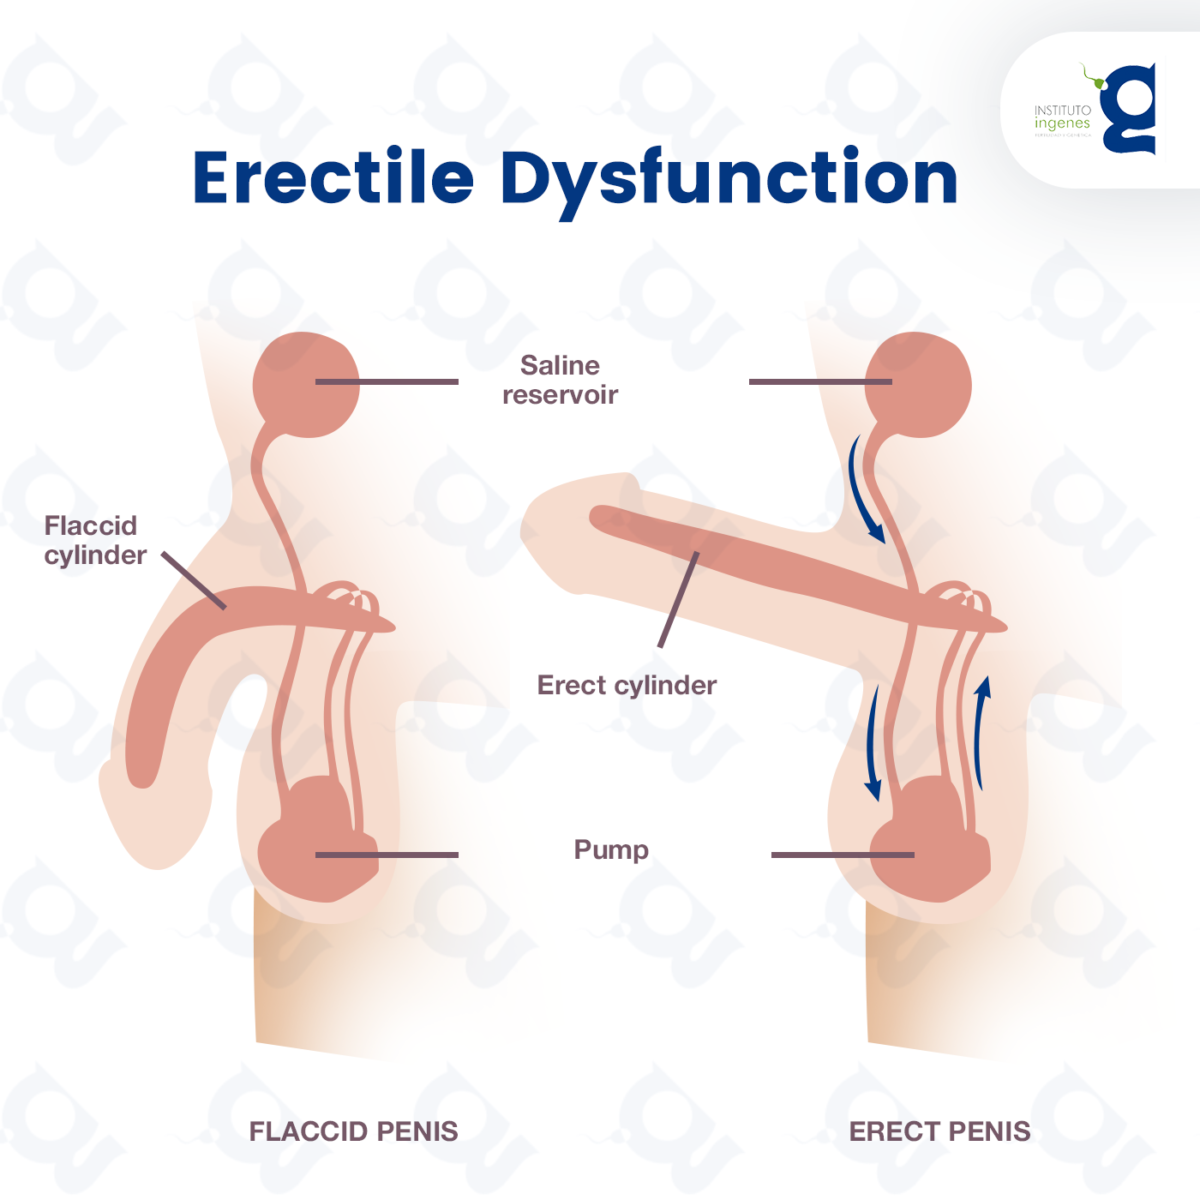 How is Erectile Dysfunction (ED) Diagnosed?